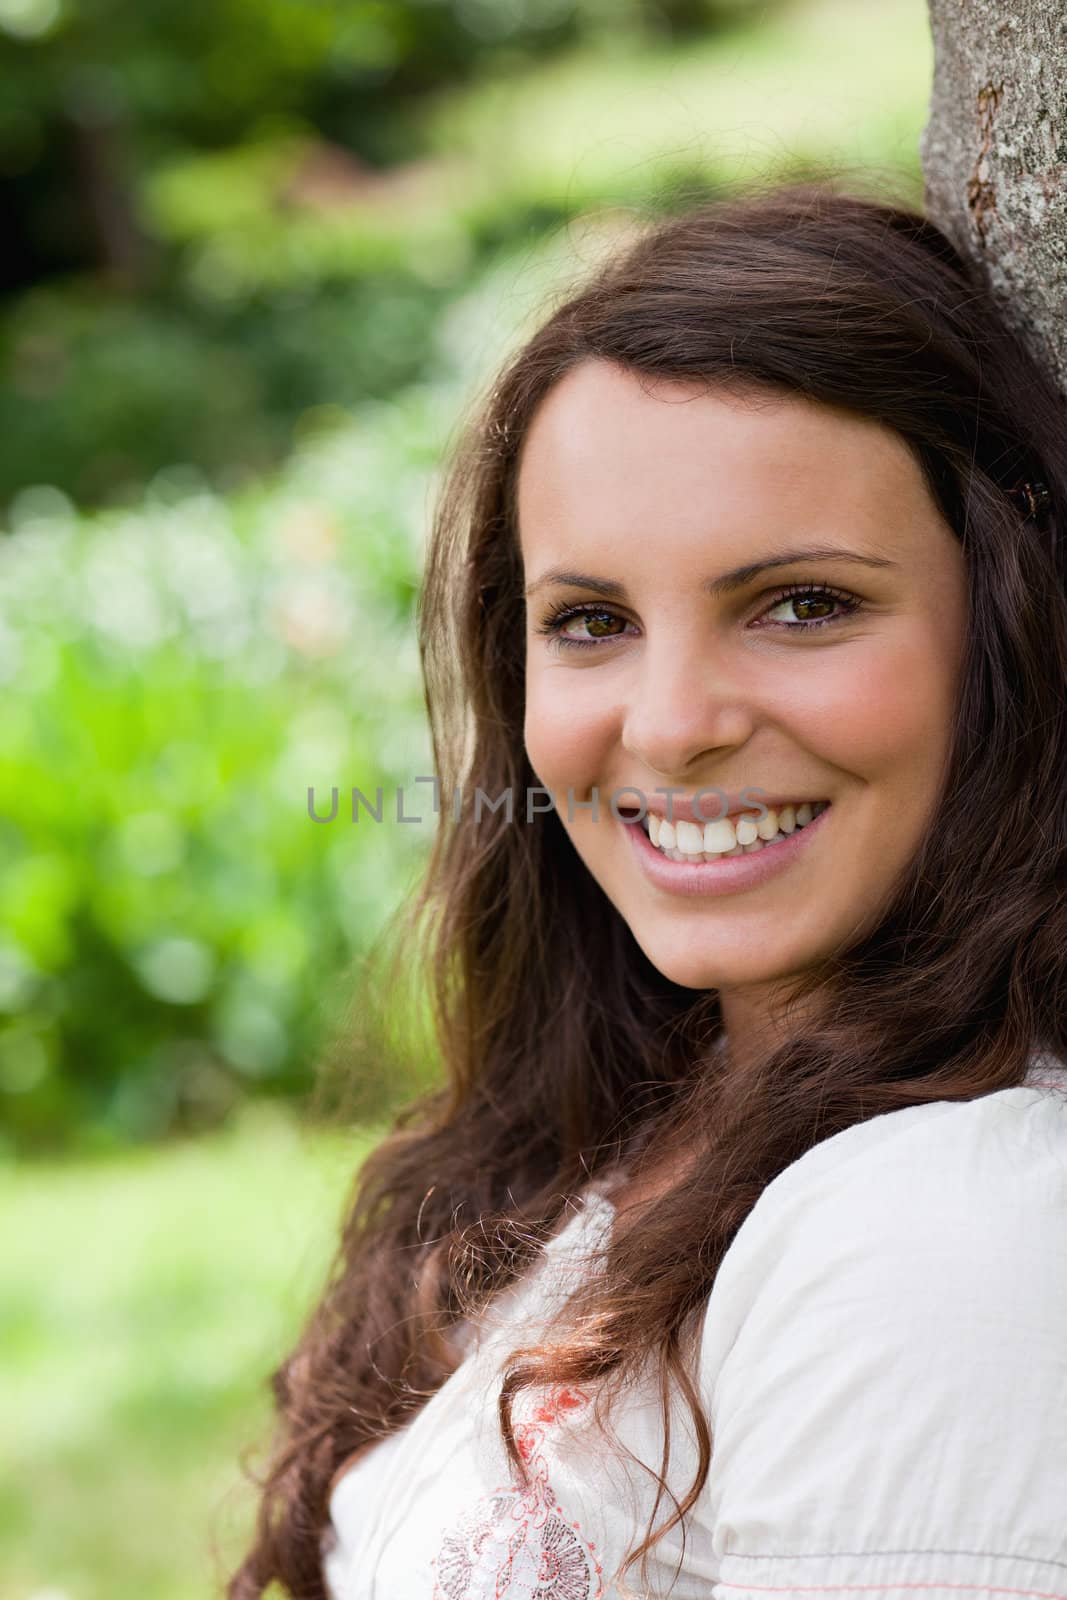 Young woman leaning against a tree while showing a beaming smile by Wavebreakmedia